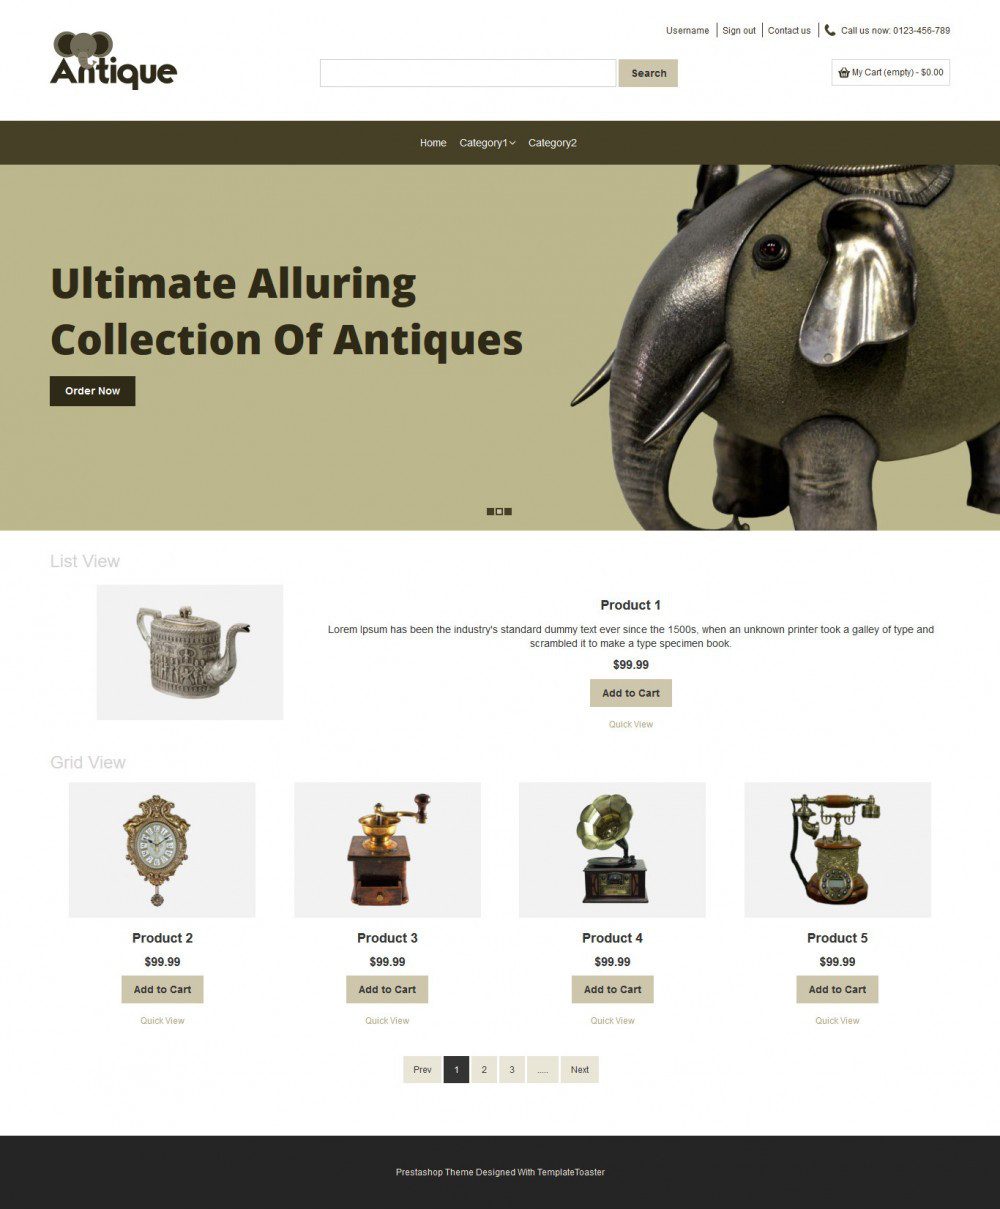 Antique Old Products Virtuemart Template